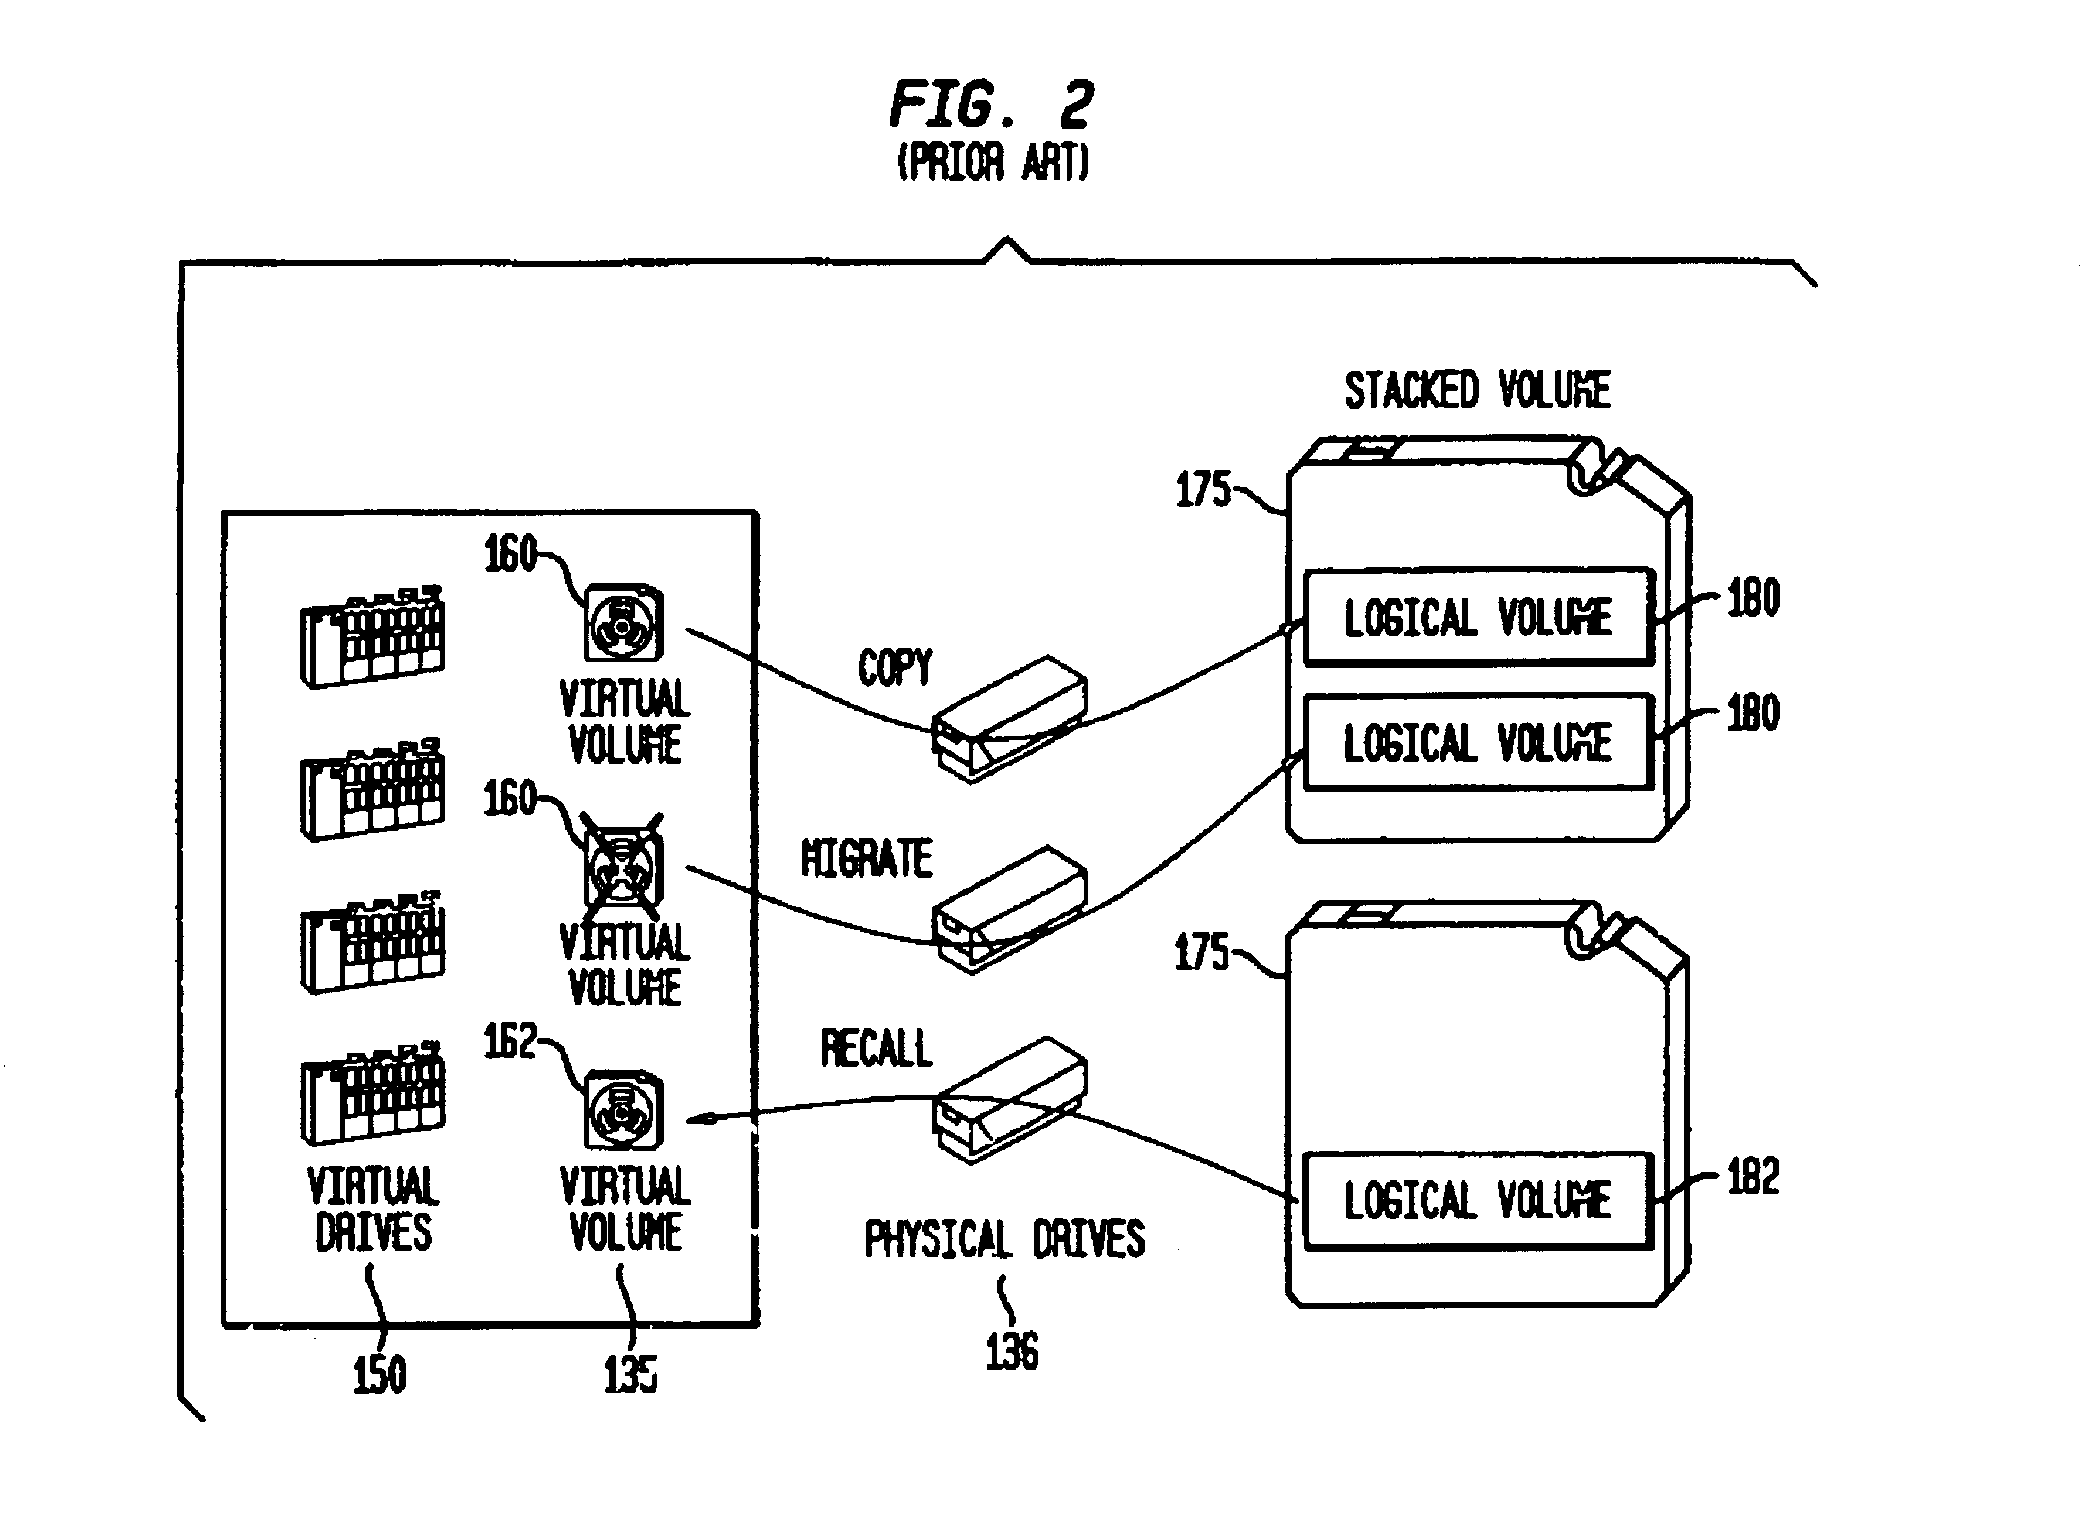 System and method to guarantee overwrite of expired data in a virtual tape server